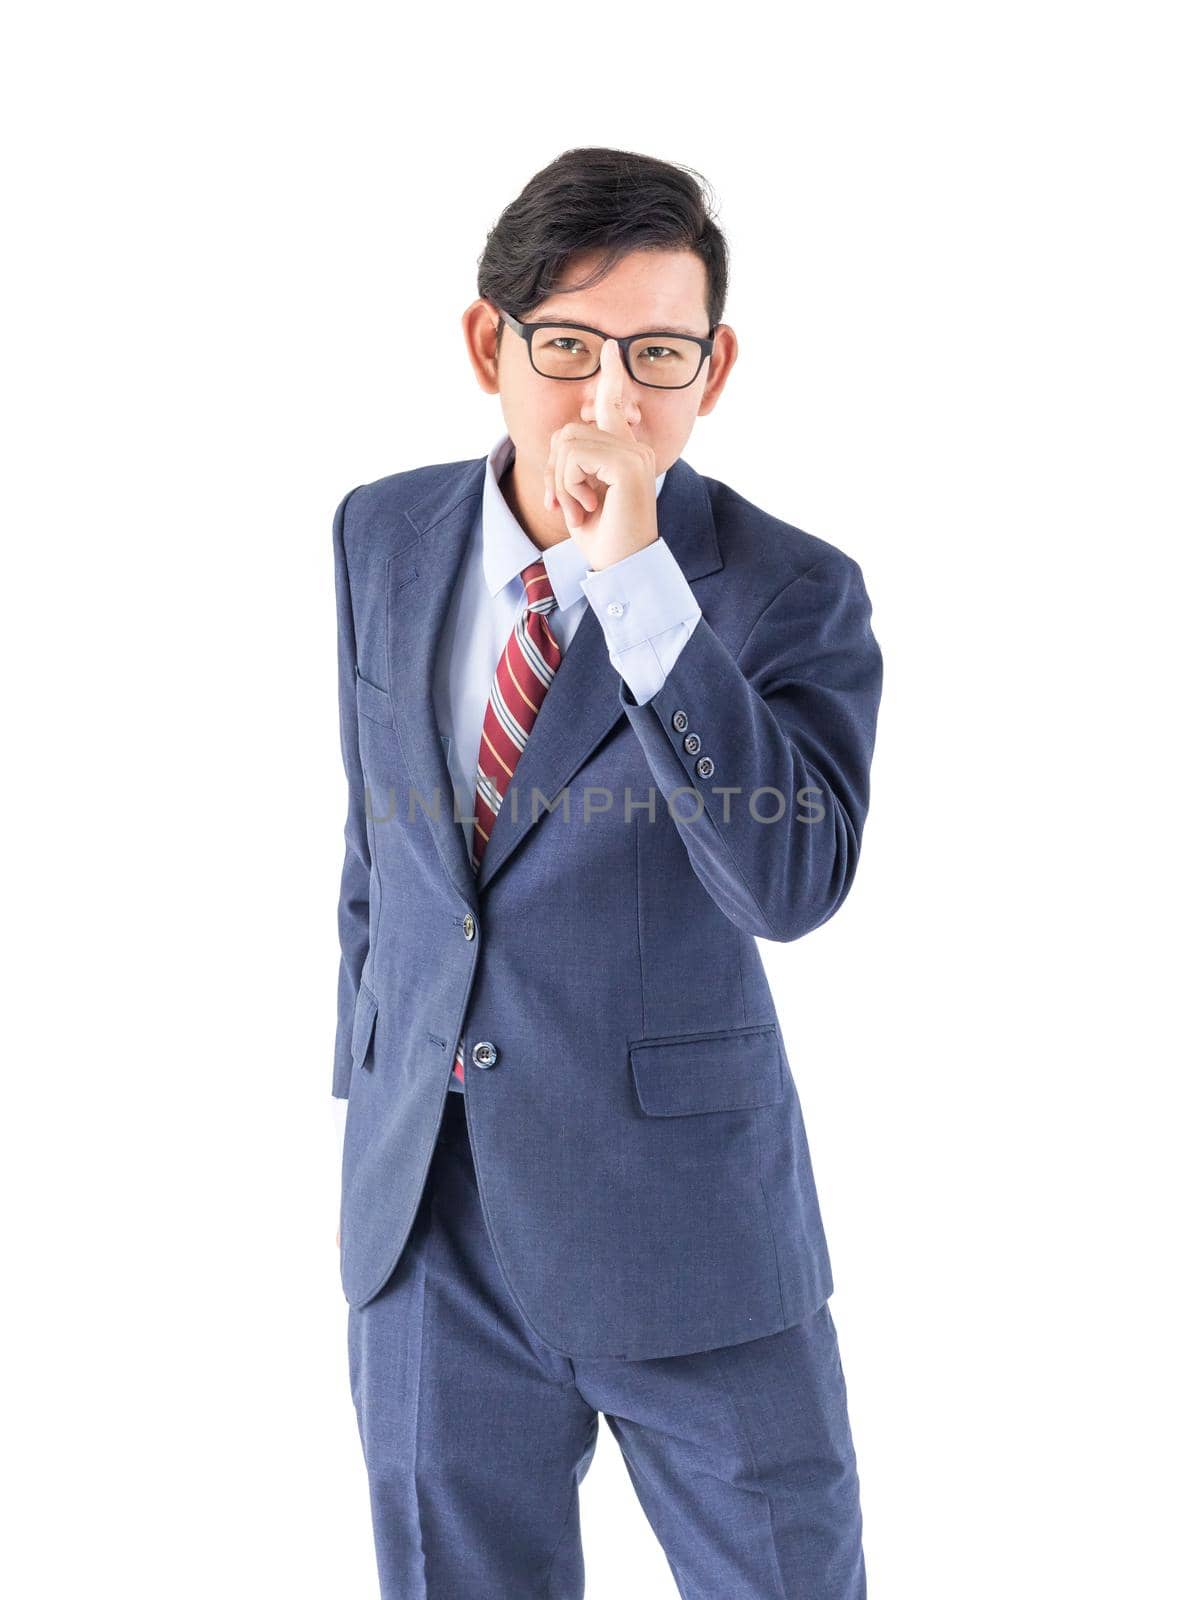 Young asian business men portrait posing in suit  over white background